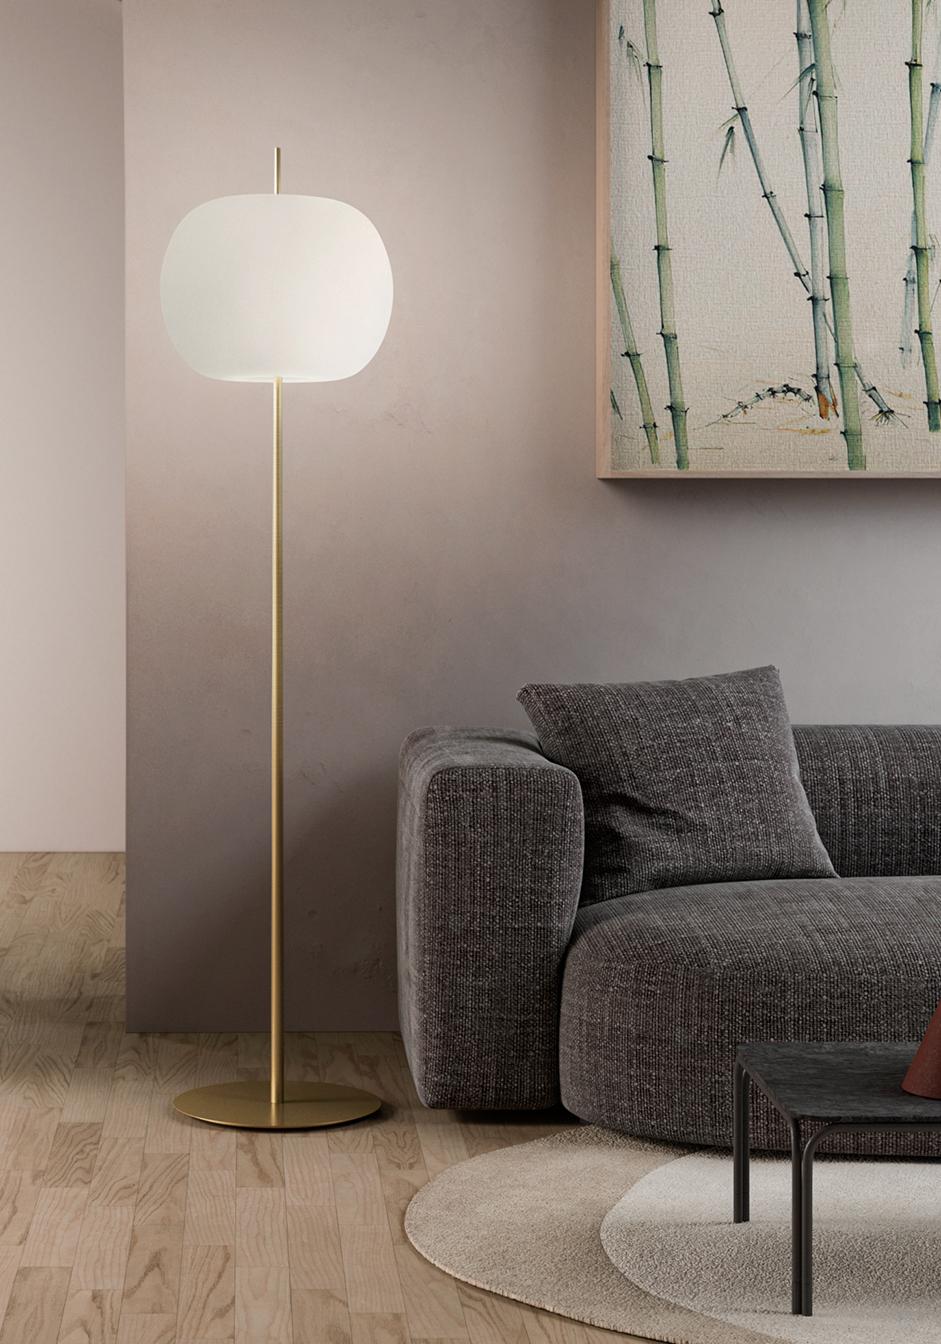 'Kushi XL' opaline glass and metal floor lamp for KDLN in black.

Executed in mouth-blown double layer opaline glass with a metallic body available in three coating finishes: black, copper and brass. This minimalist yet graceful design features a